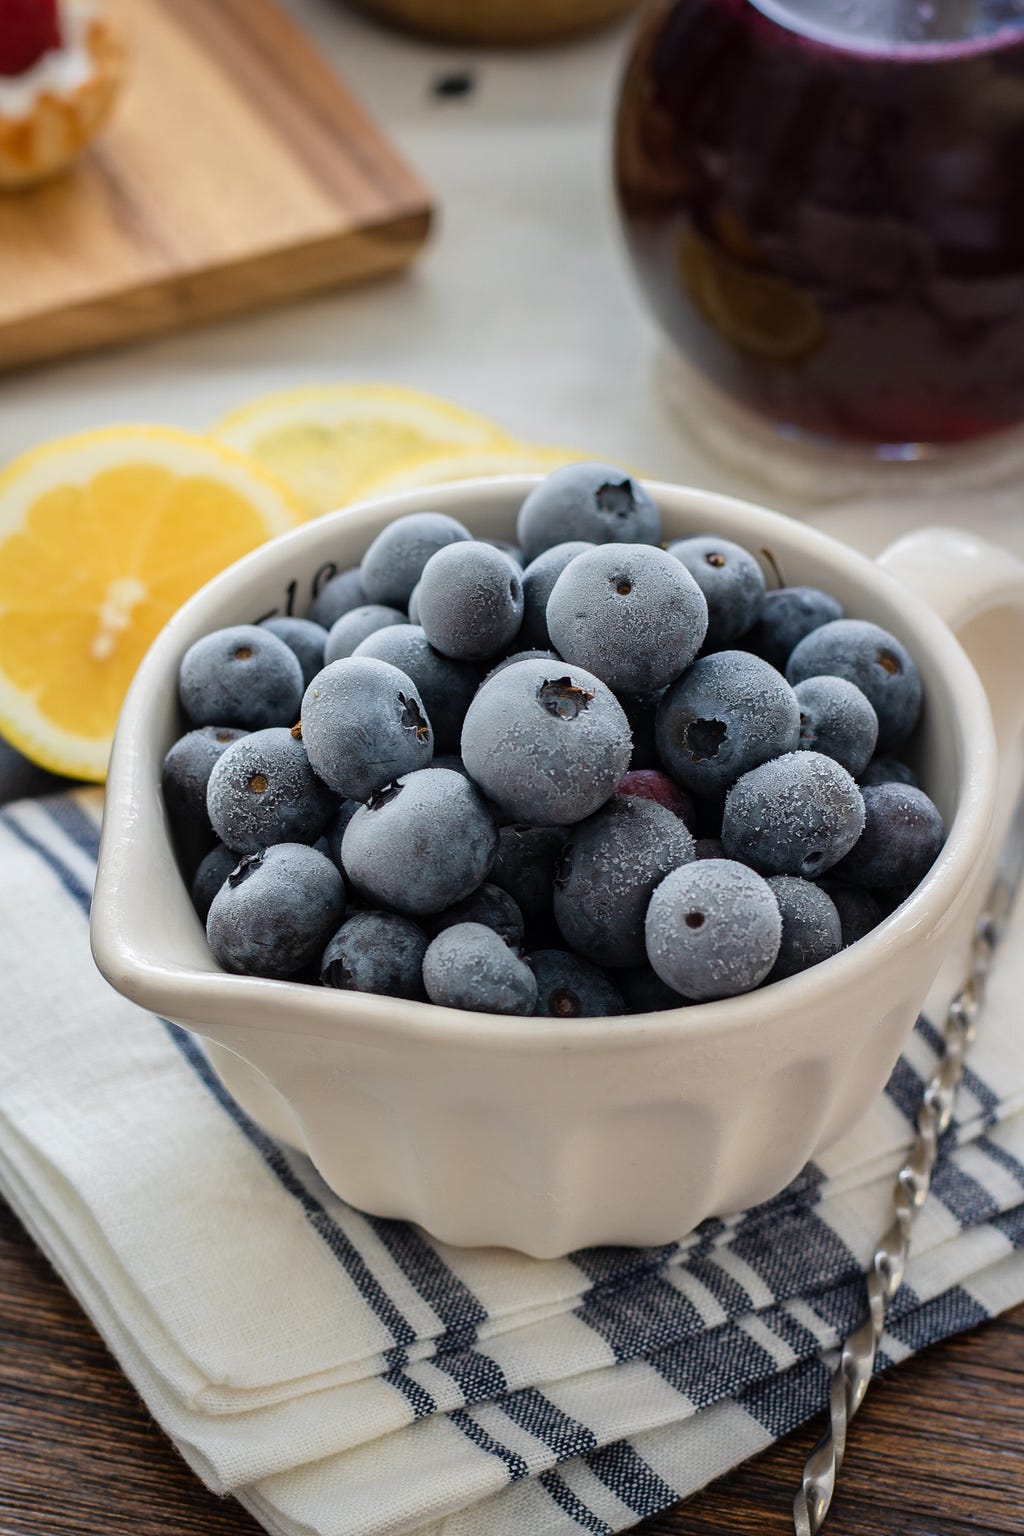 A bowl of frozen blueberries sitting on a blue and white kitchen towel with lemons and blueberry jam in the background.